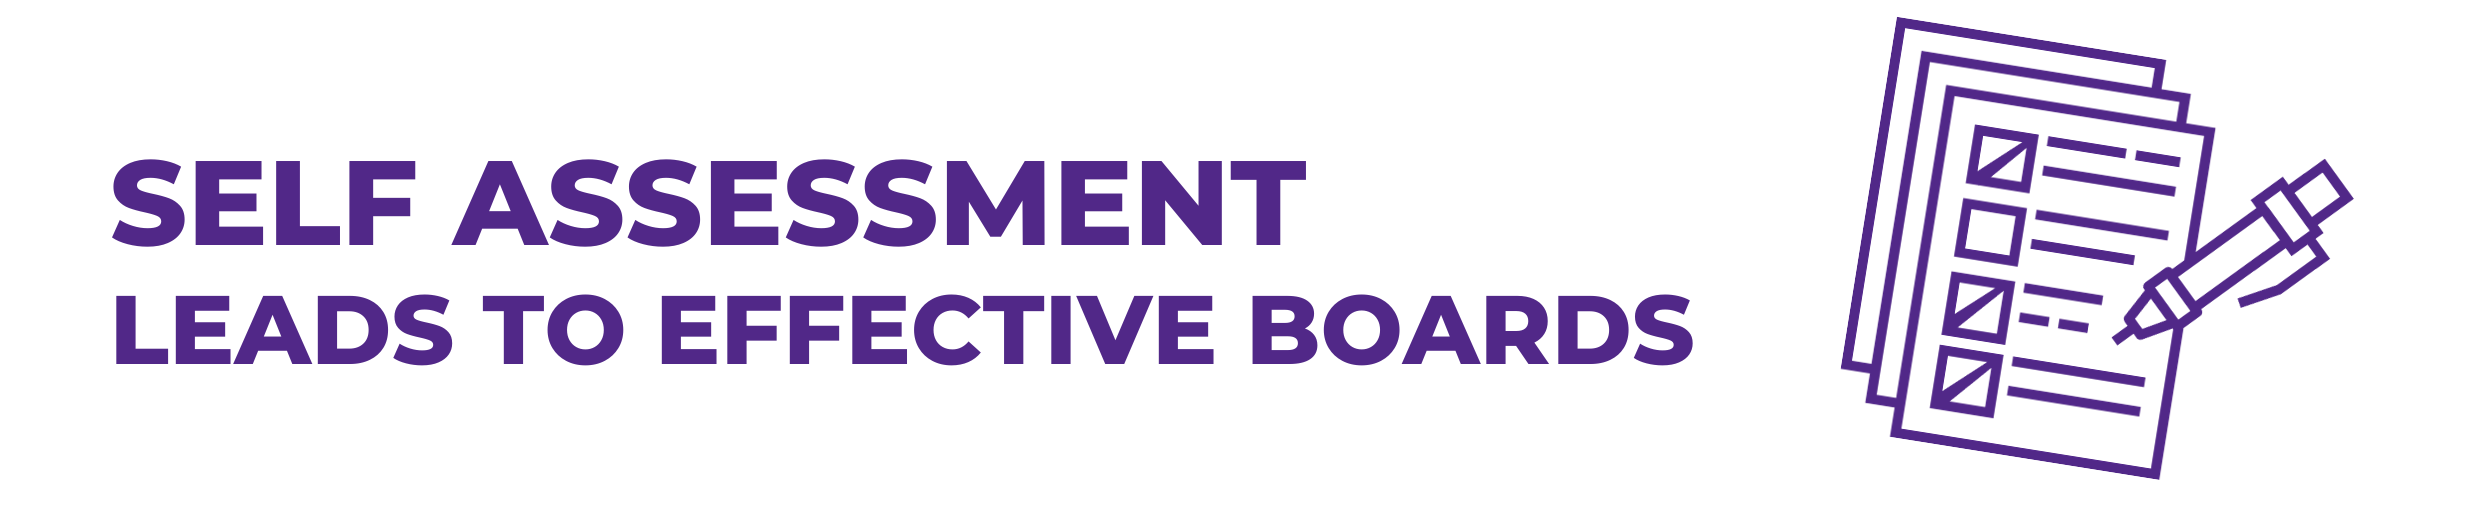 Self-Assessment Leads to Effective Boards